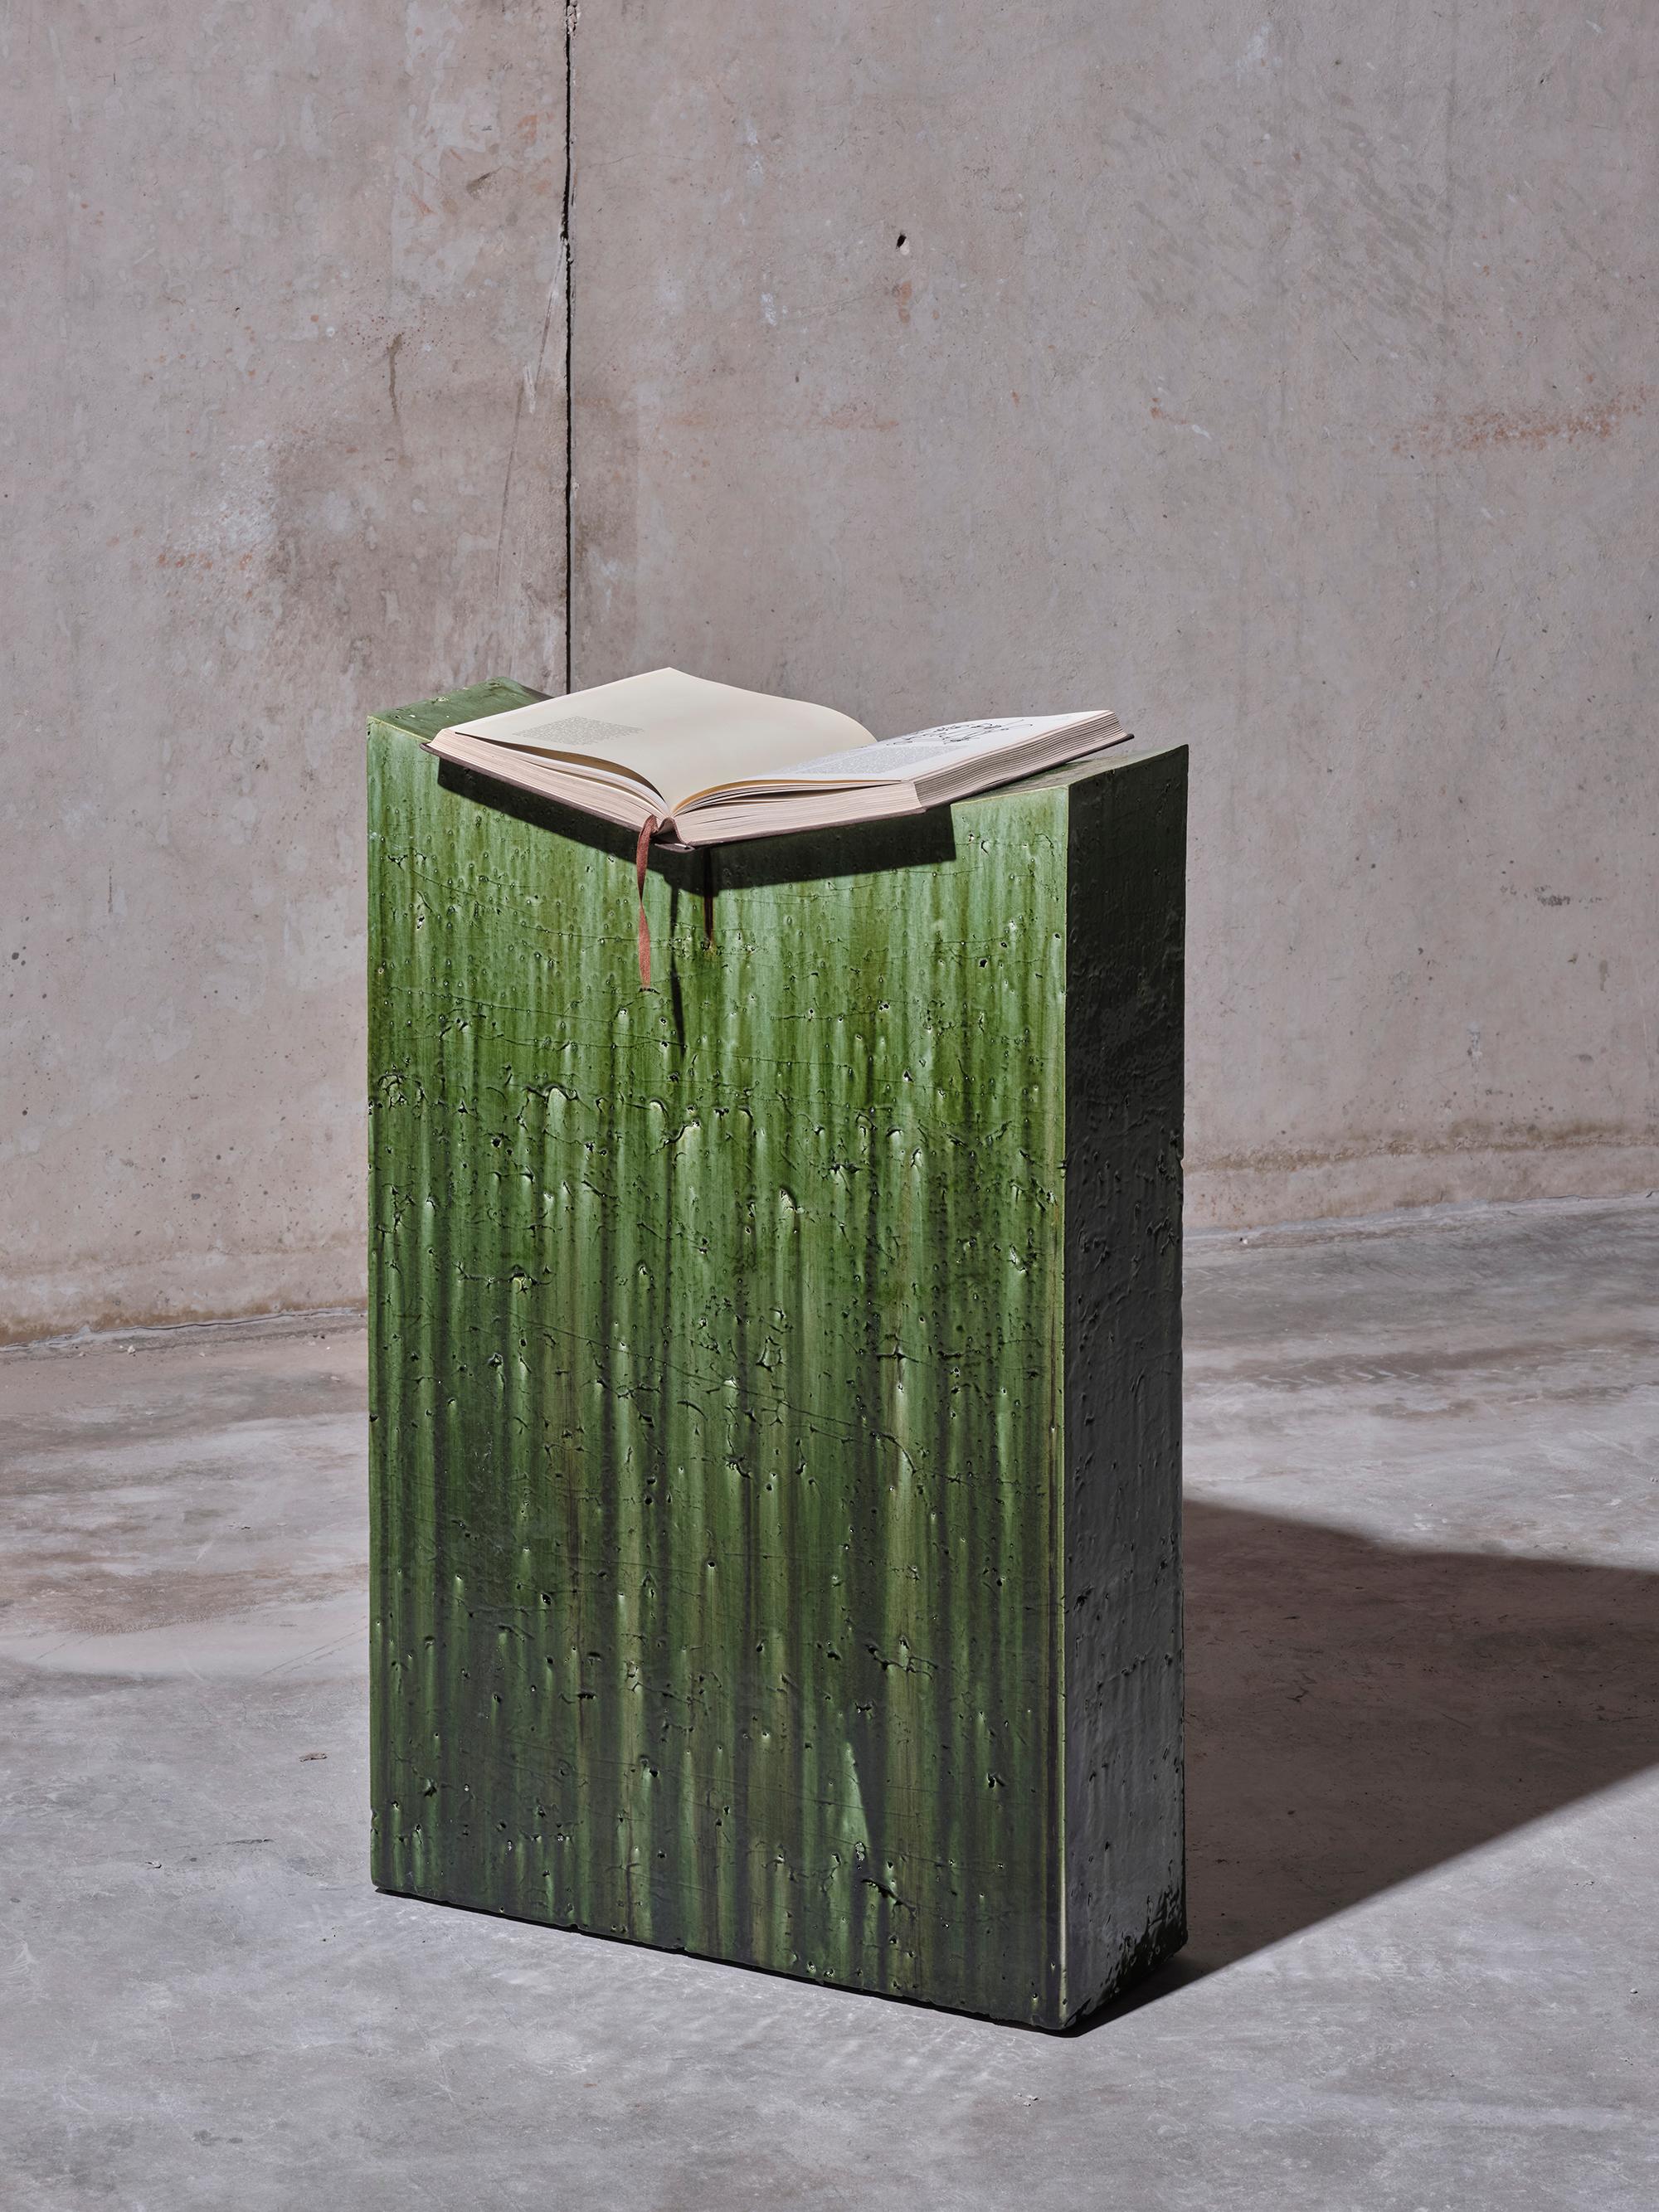 Handmade stoneware lectern manufactured at the workshop of Apparatu in Barcelona. It serves as a standing desk or pedestal. Different clay bodys are mixed with natural fibers like corn, straw, or heather straw. The pieces are casted by hand,